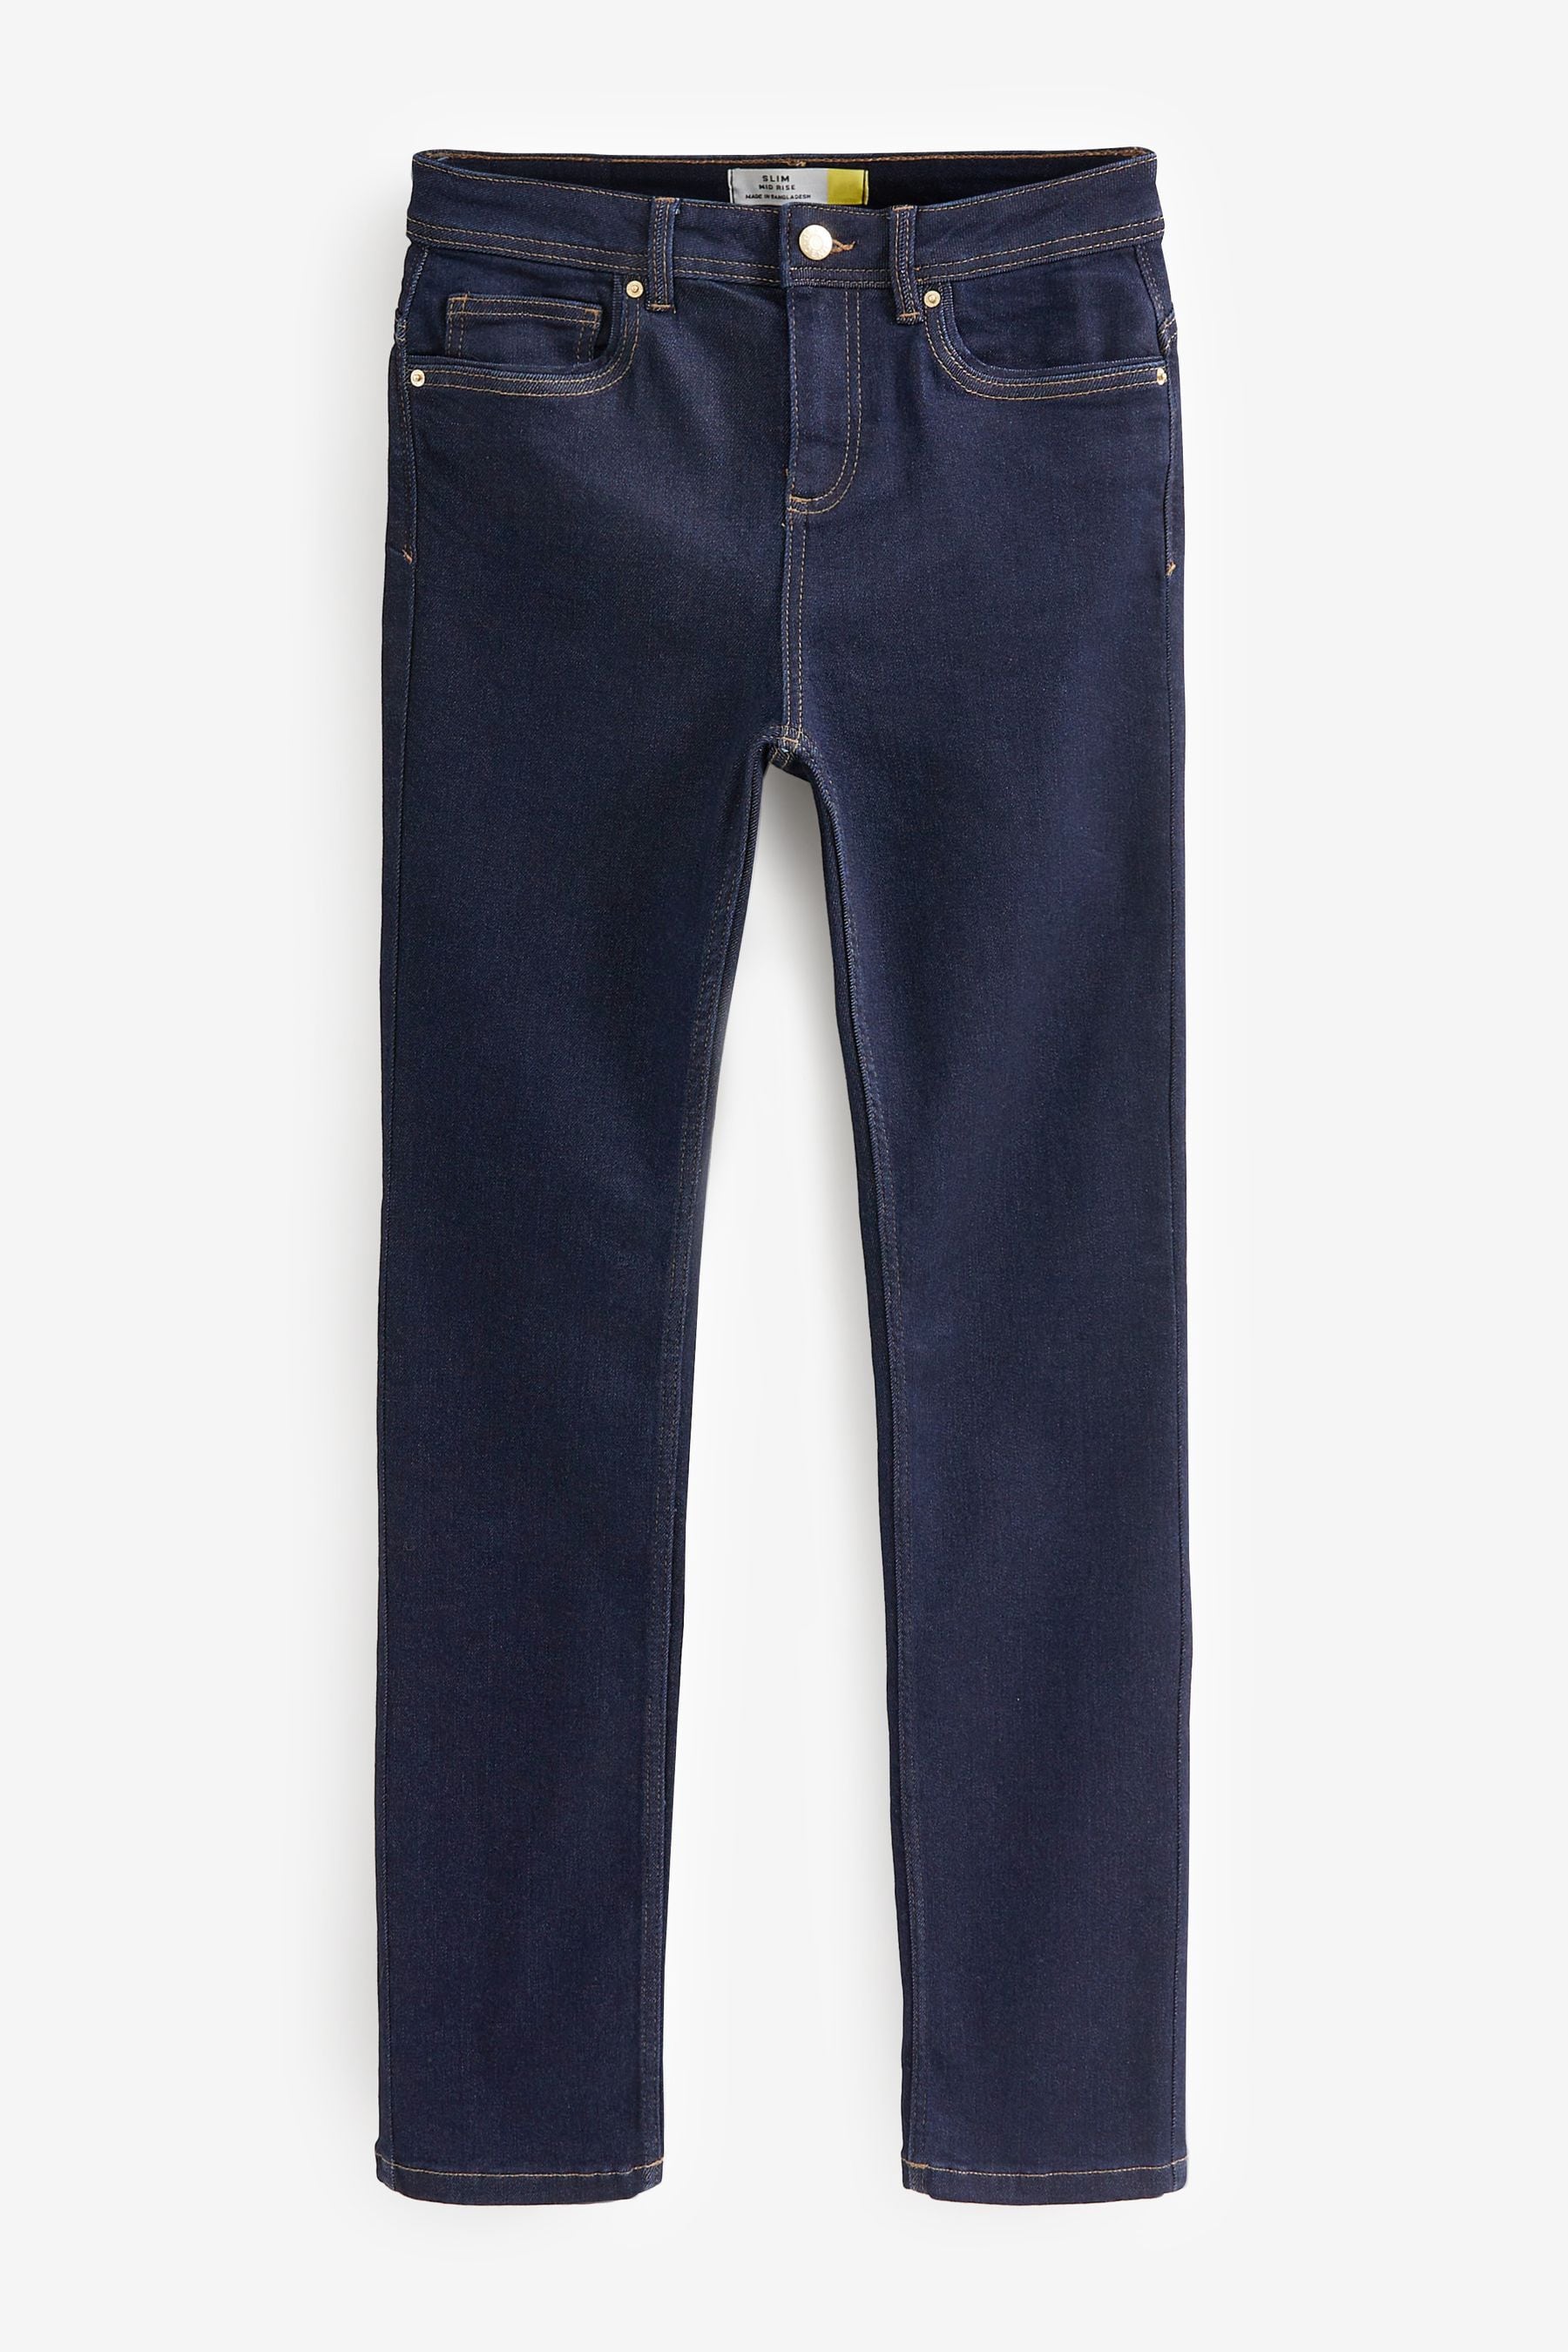 Buy Super Soft Slim Jeans from Next Ireland